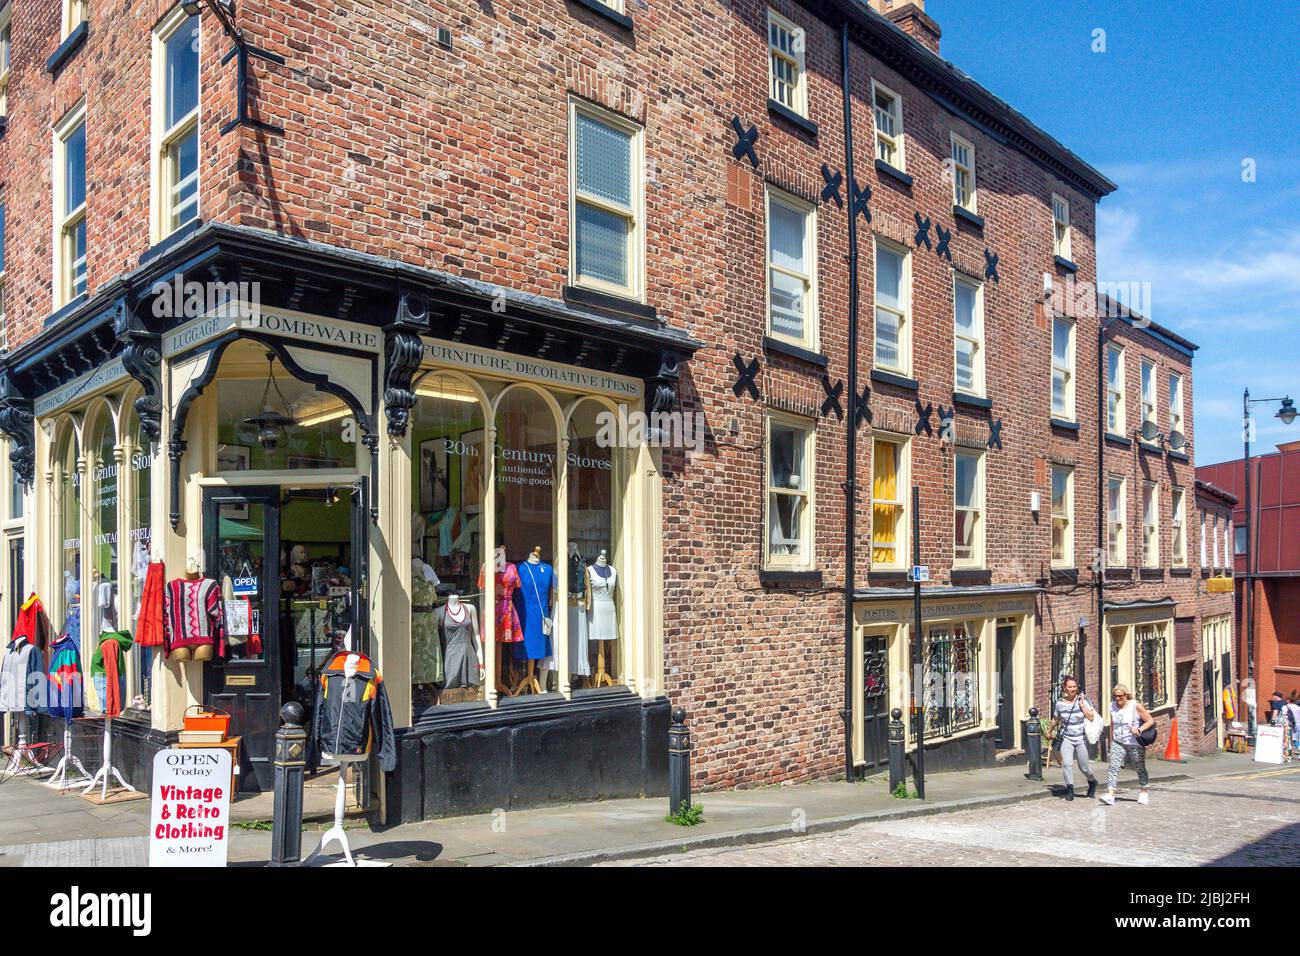 Vintage et Retro Clothing Store, Market place, Stockport, Greater Manchester, Angleterre, Royaume-Uni Banque D'Images